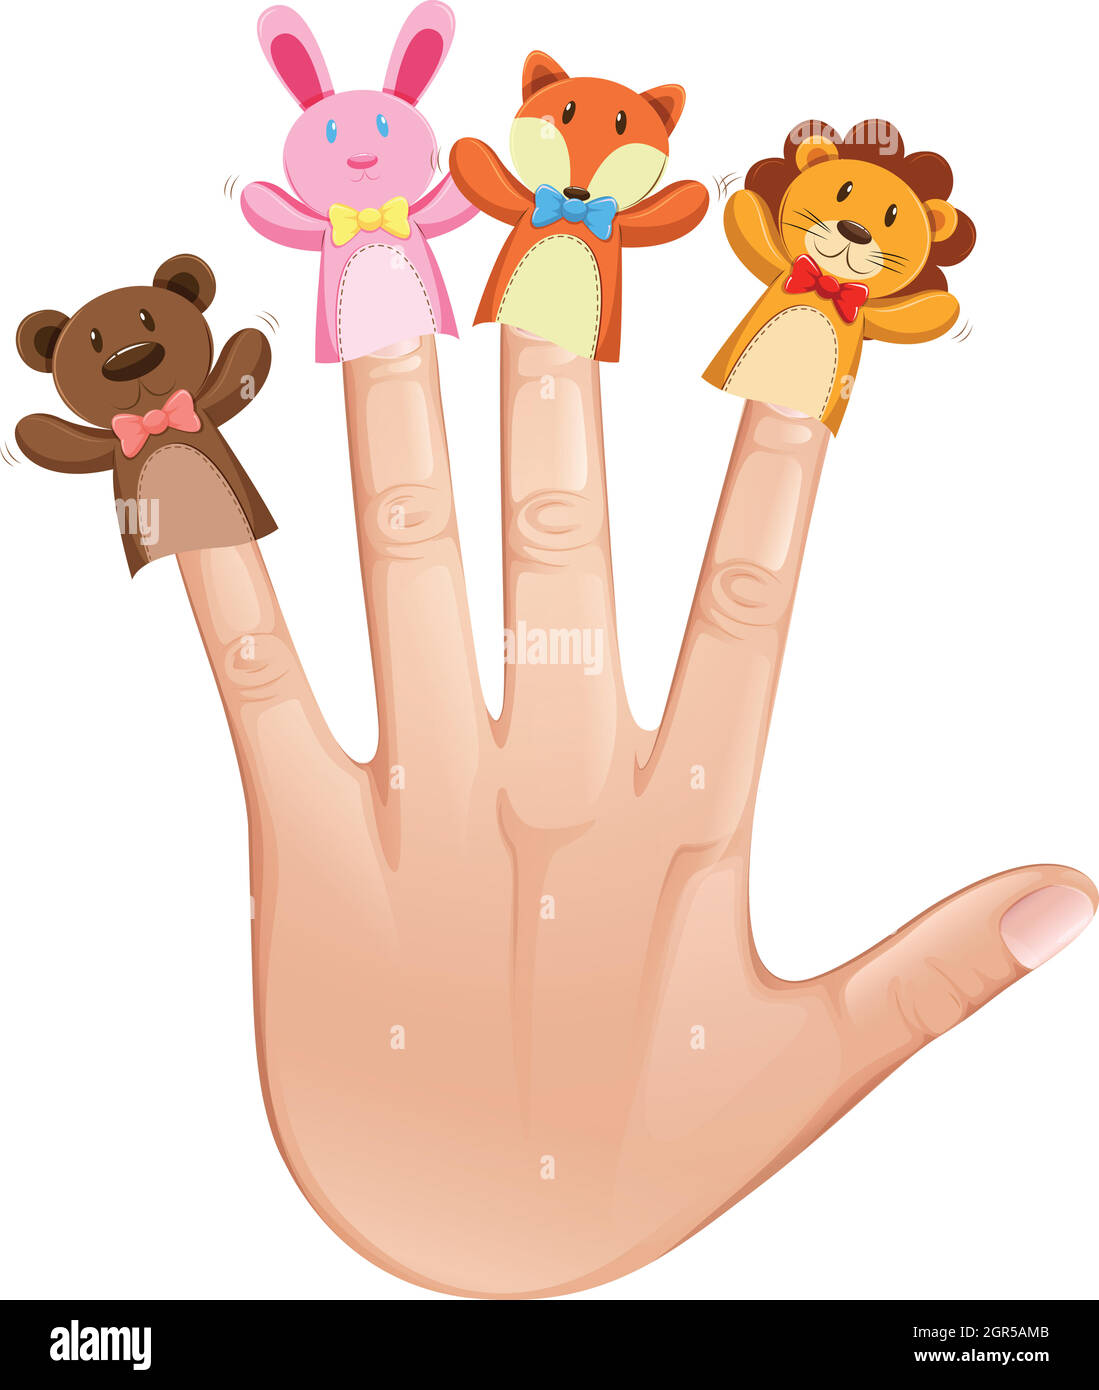 Animal finger puppets on human hand Stock Vector